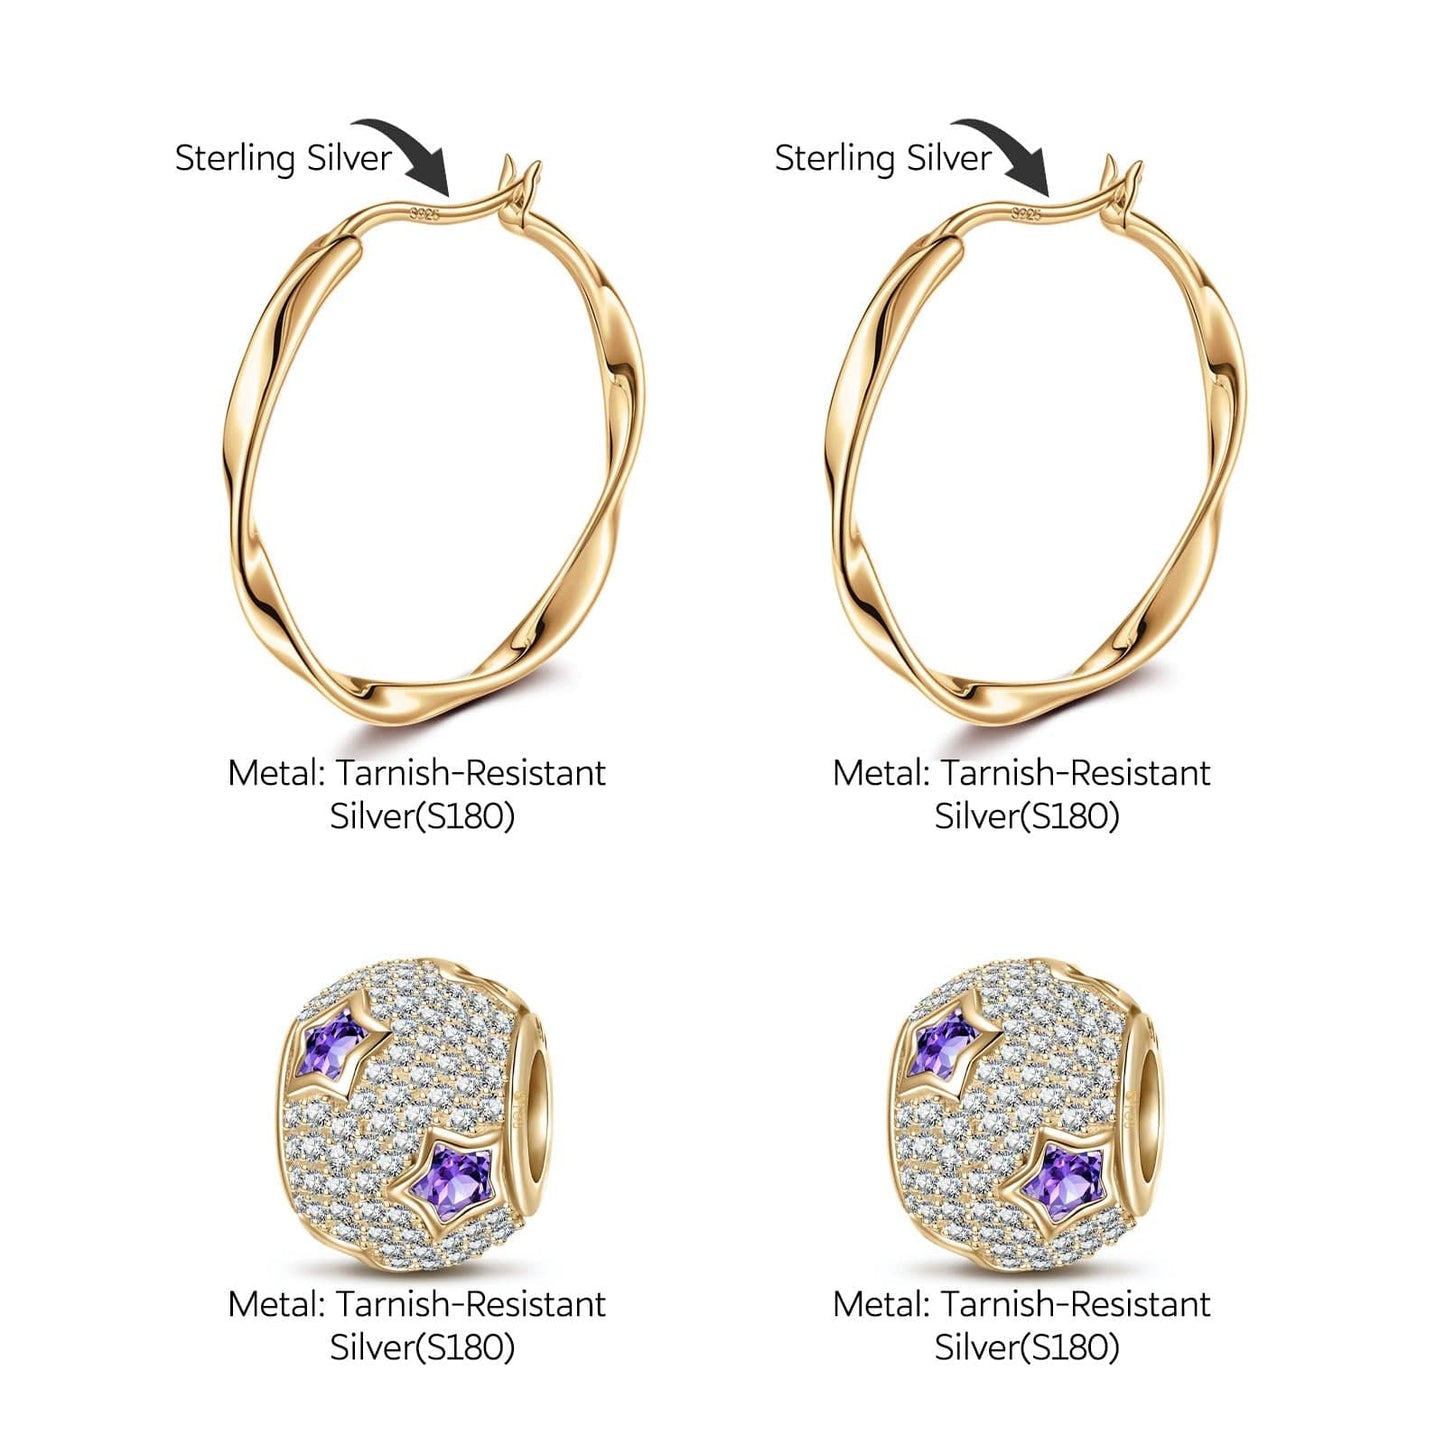 Purple Star Tarnish-resistant Silver Charms Earrings Set M Size Classic Hoop Earrings with Sterling Silver Ear Post In 14K Gold Plated